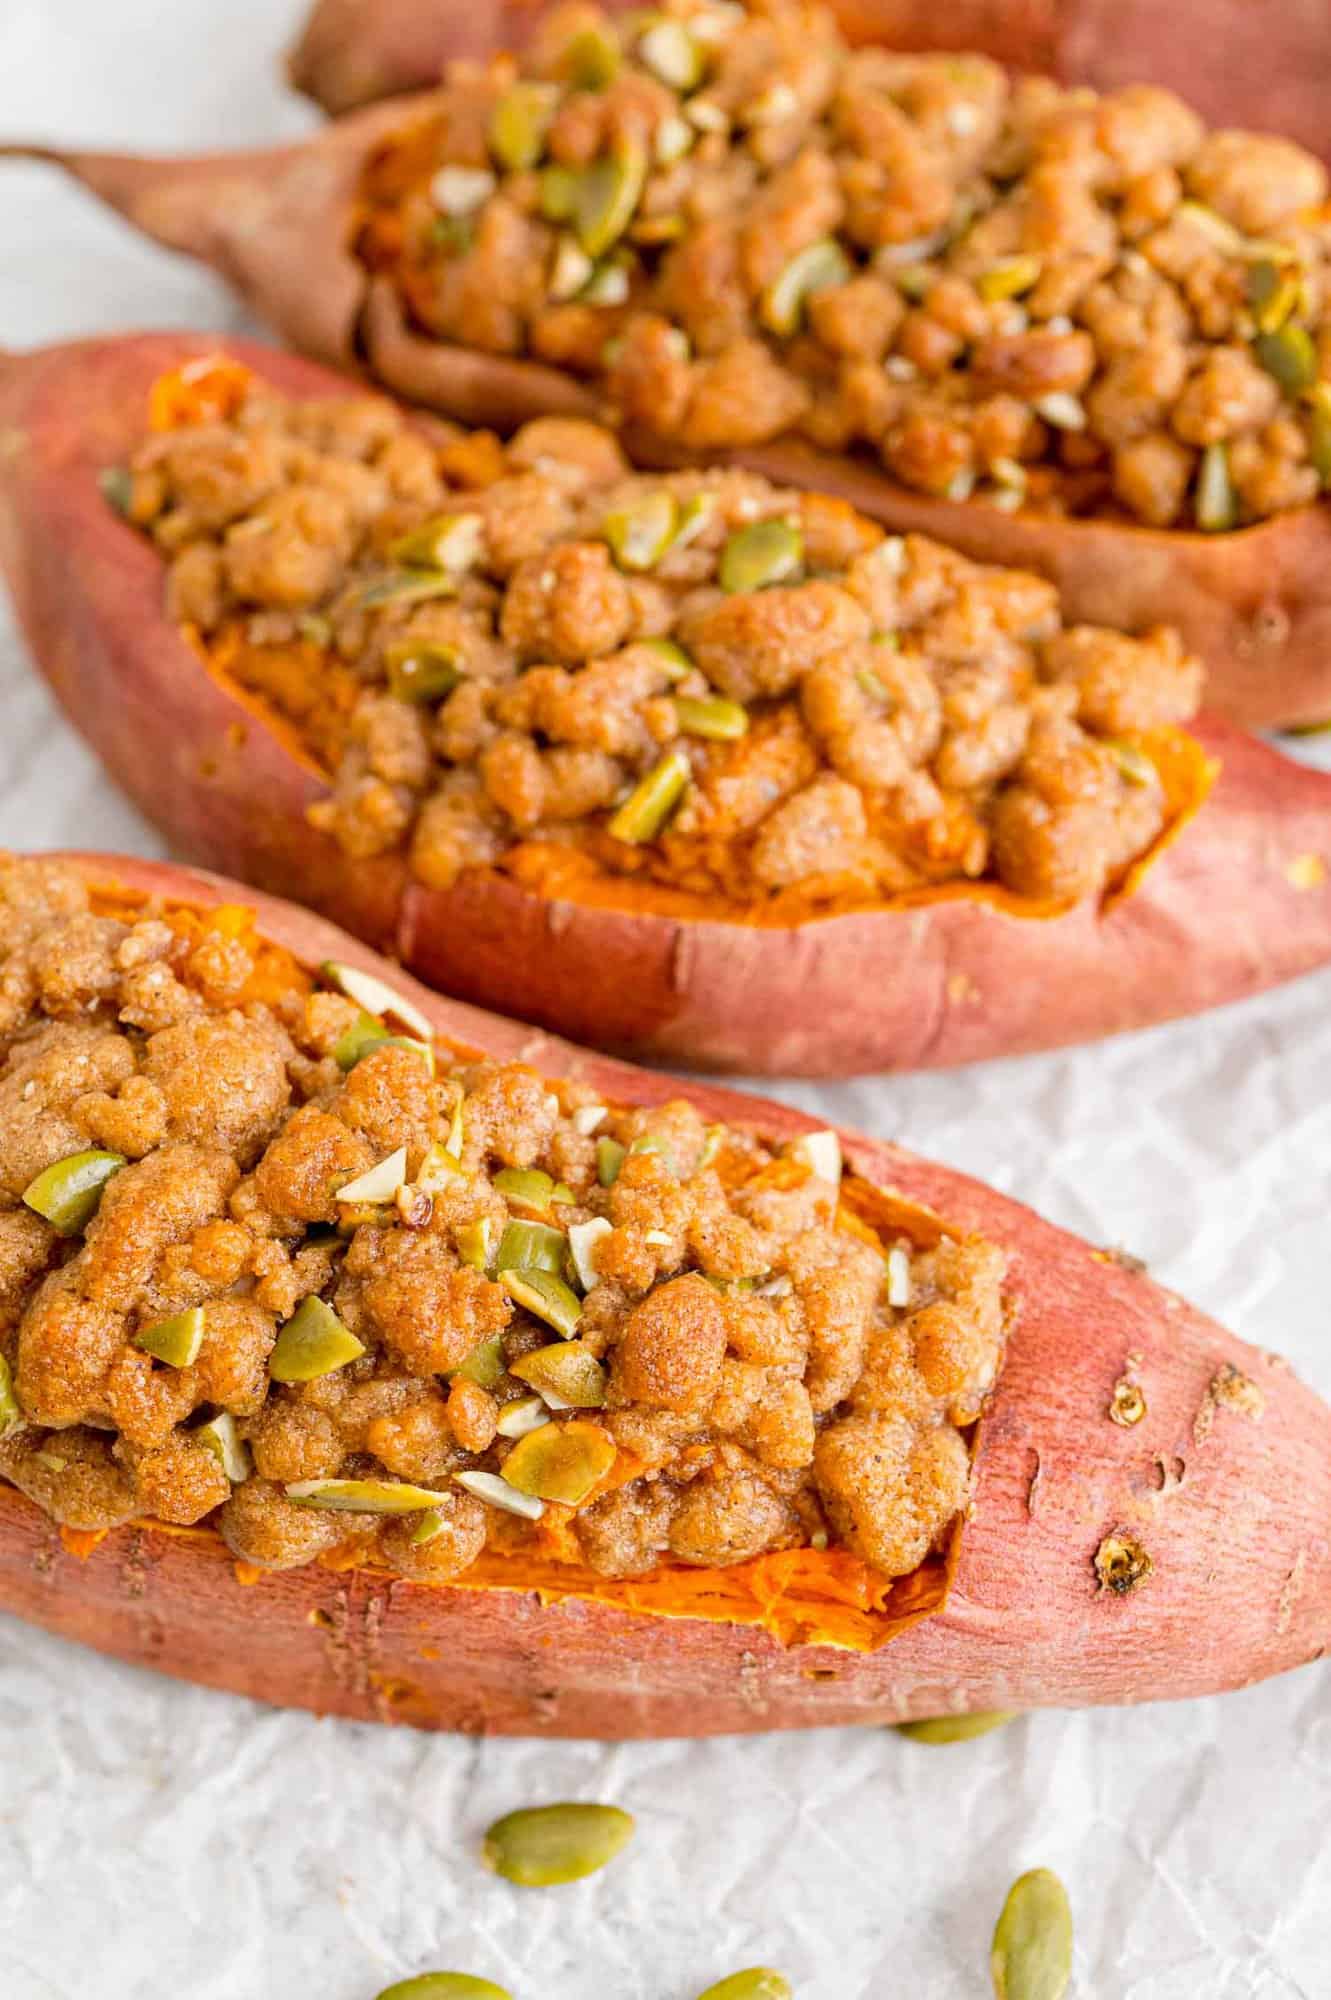 Three twice baked sweet potatoes with a streusel topping.